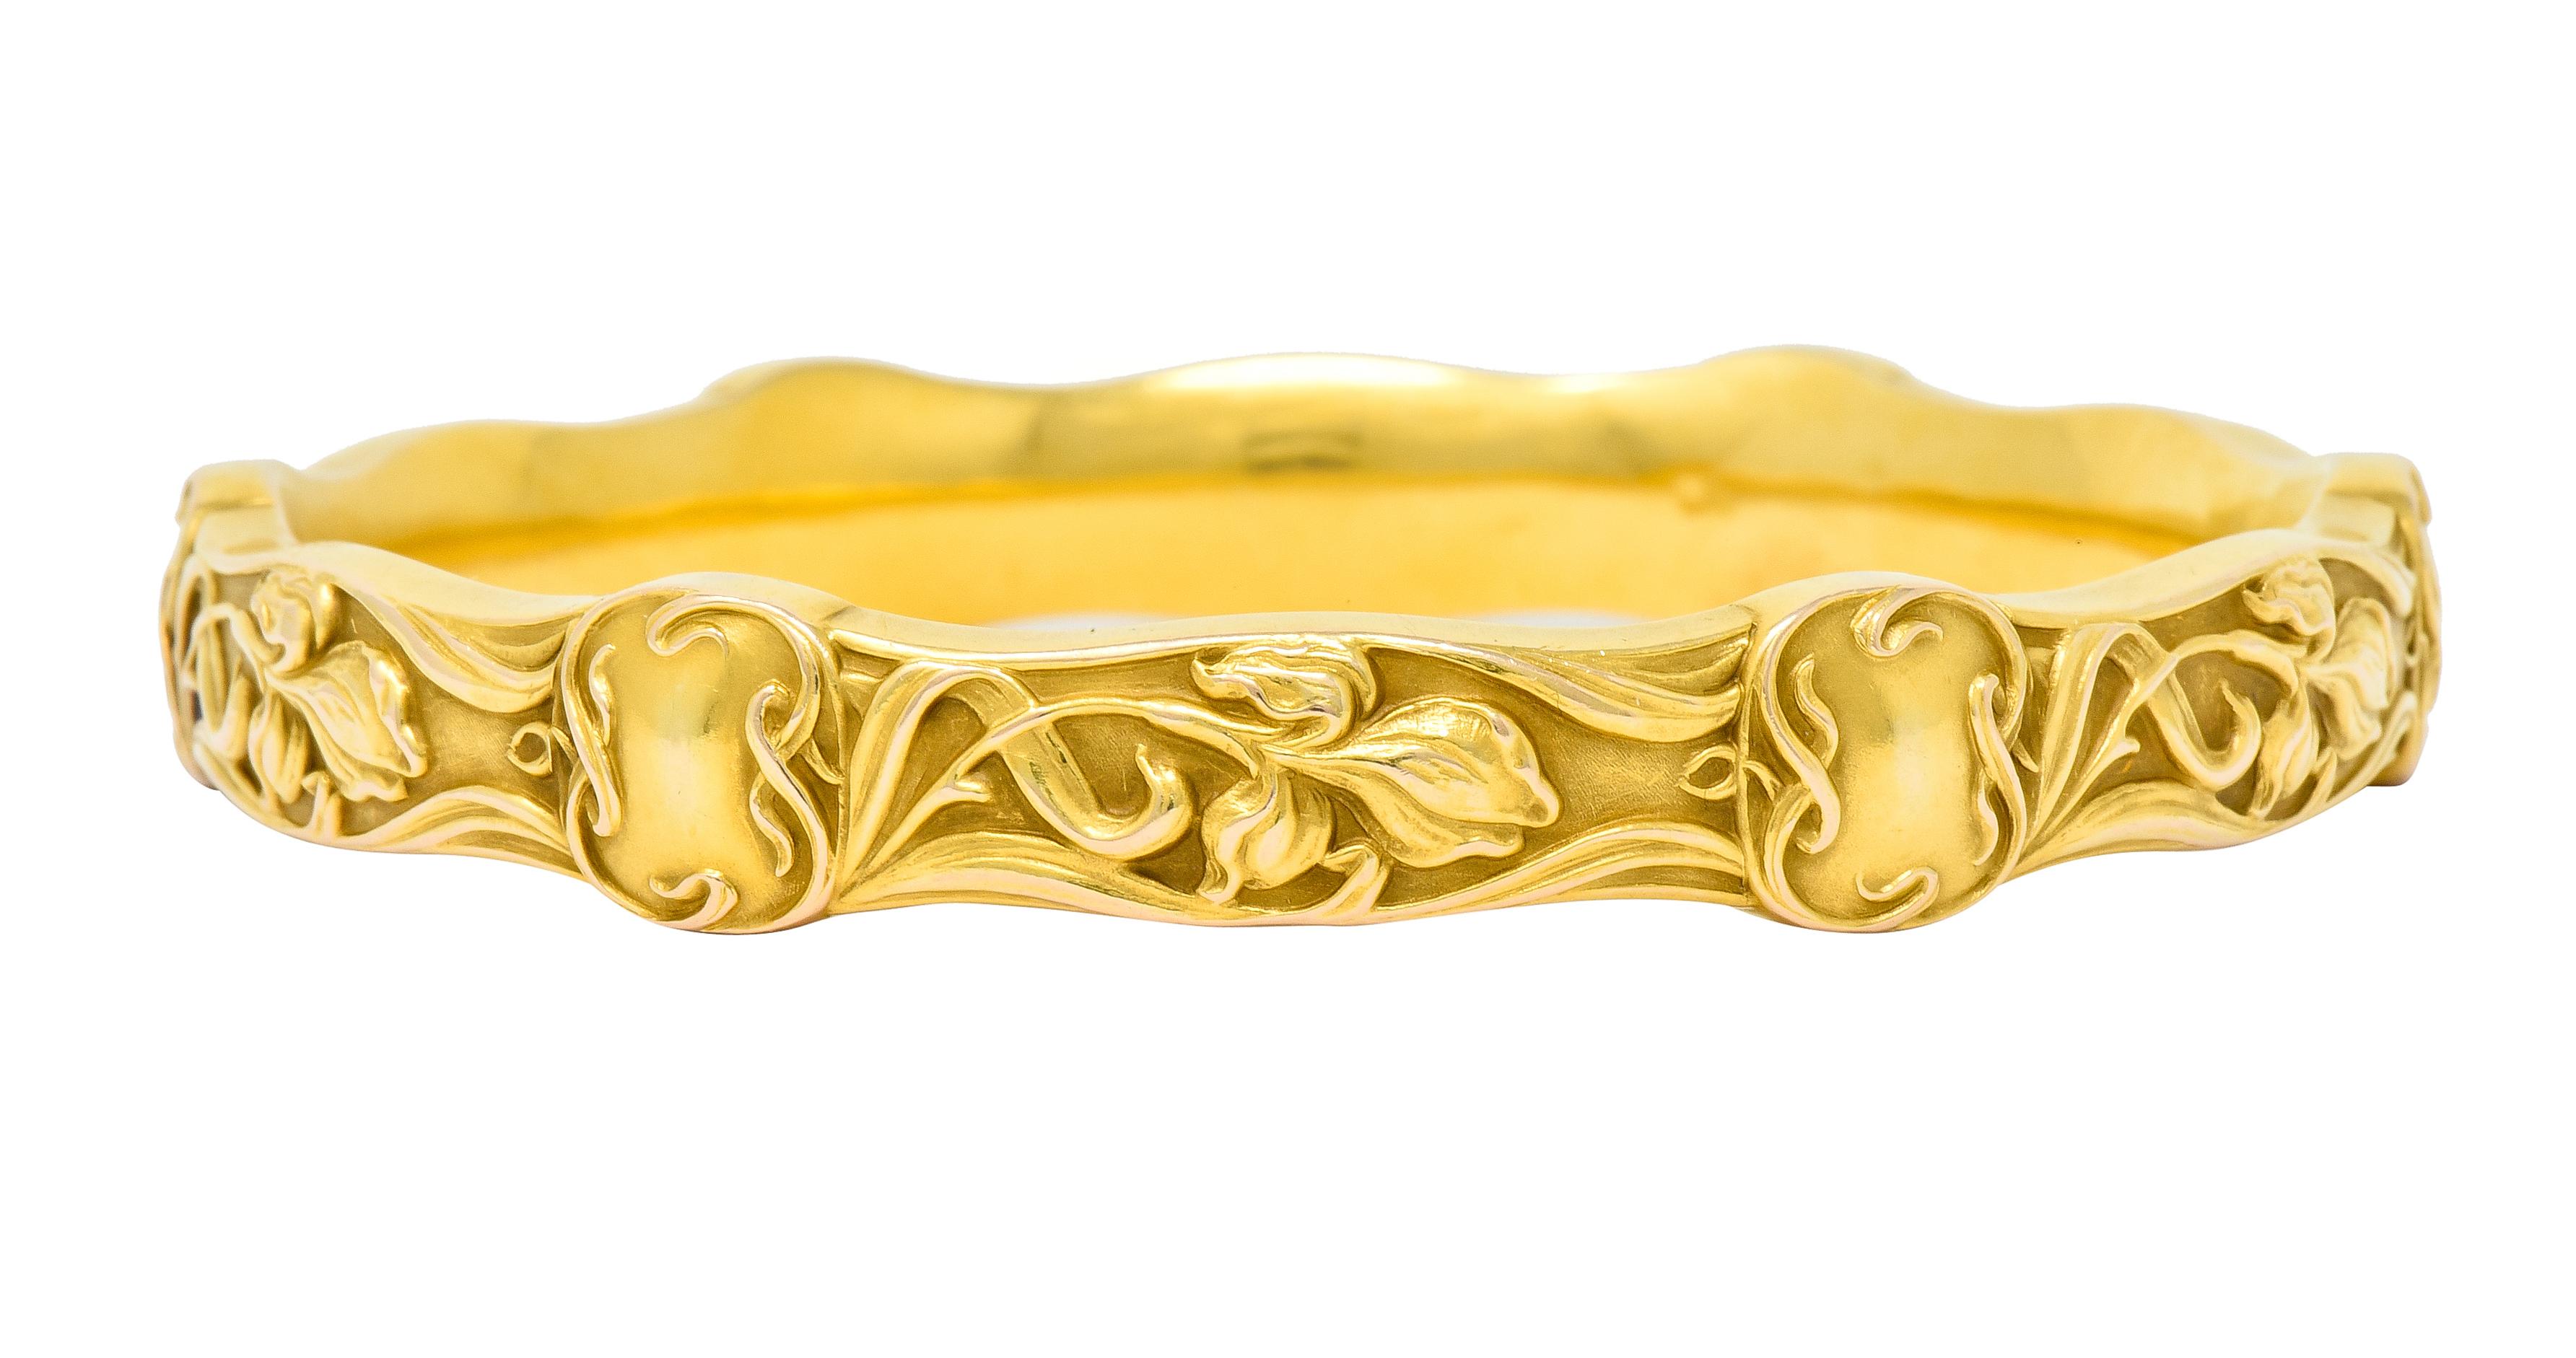 Designed as a wavy edged bangle bracelet decorated with highly rendered iris flowers and whiplash vines

Accented throughout by six cushion shaped stations with scrolled vine surrounds

One profile edge with moderate discoloration - consistent with